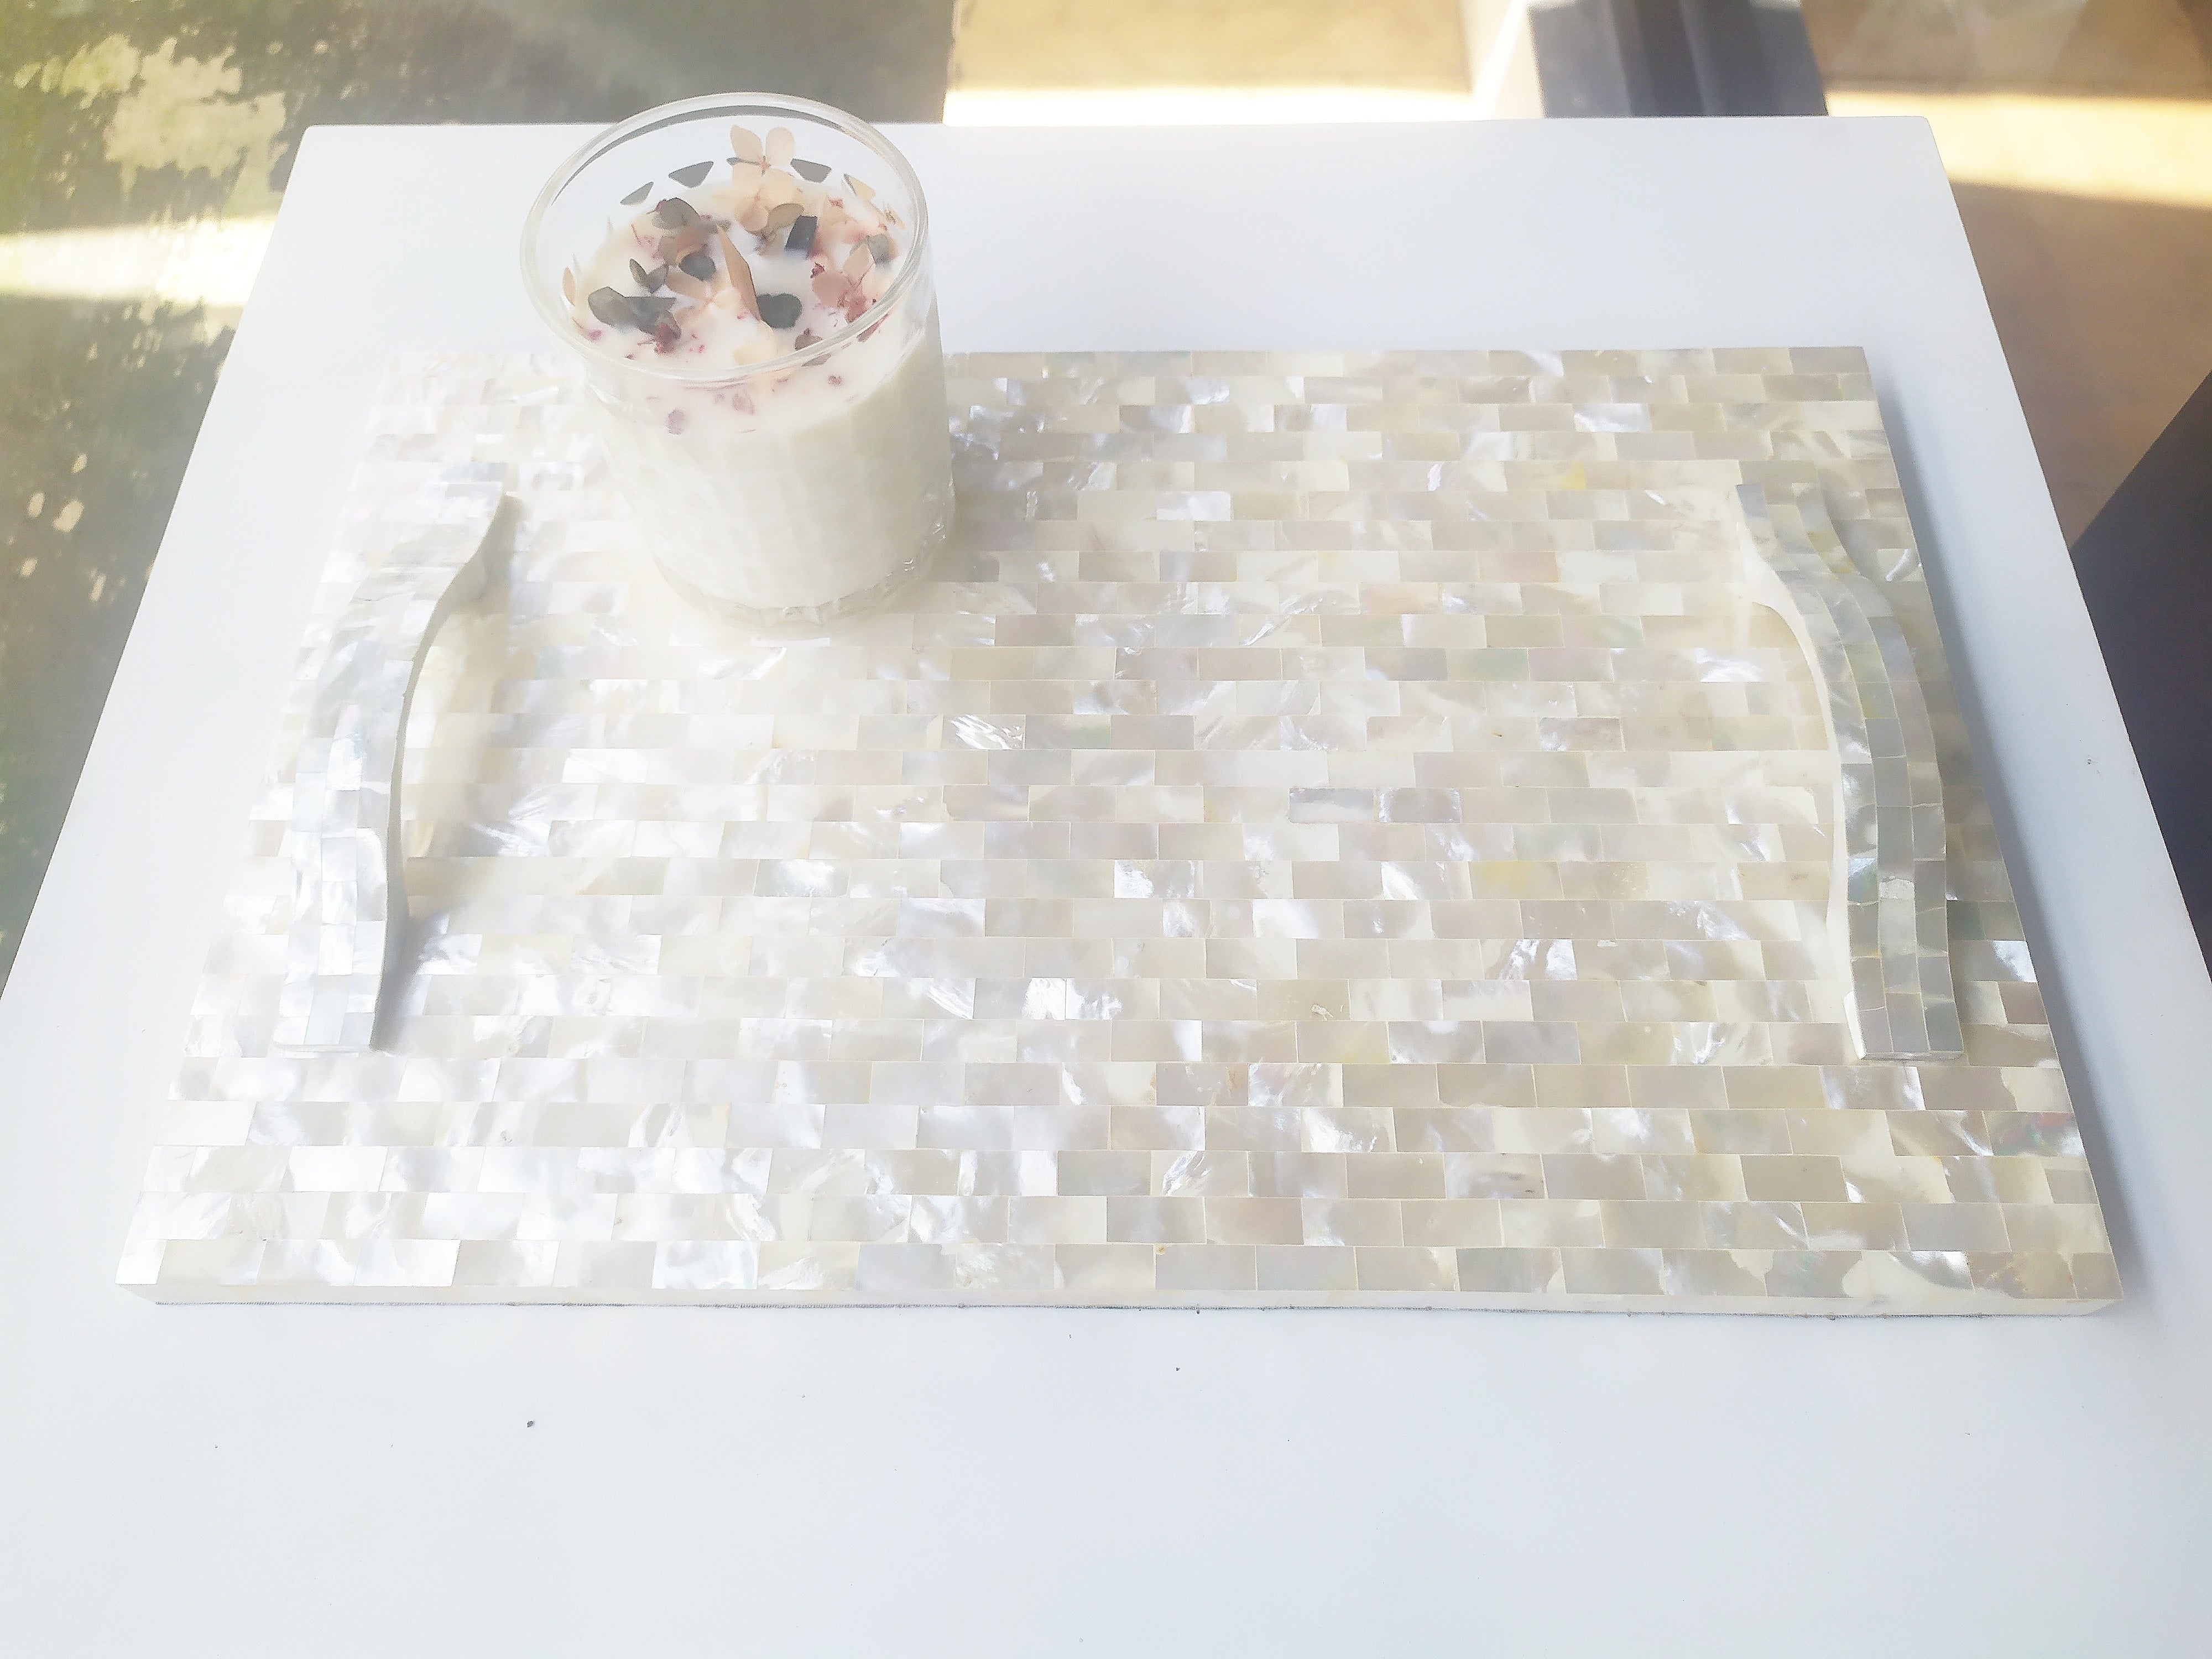 Mother of Pearl Square Decorative Tray - Pearl White Tray with Mother of Pearl Bridge Bow Handles